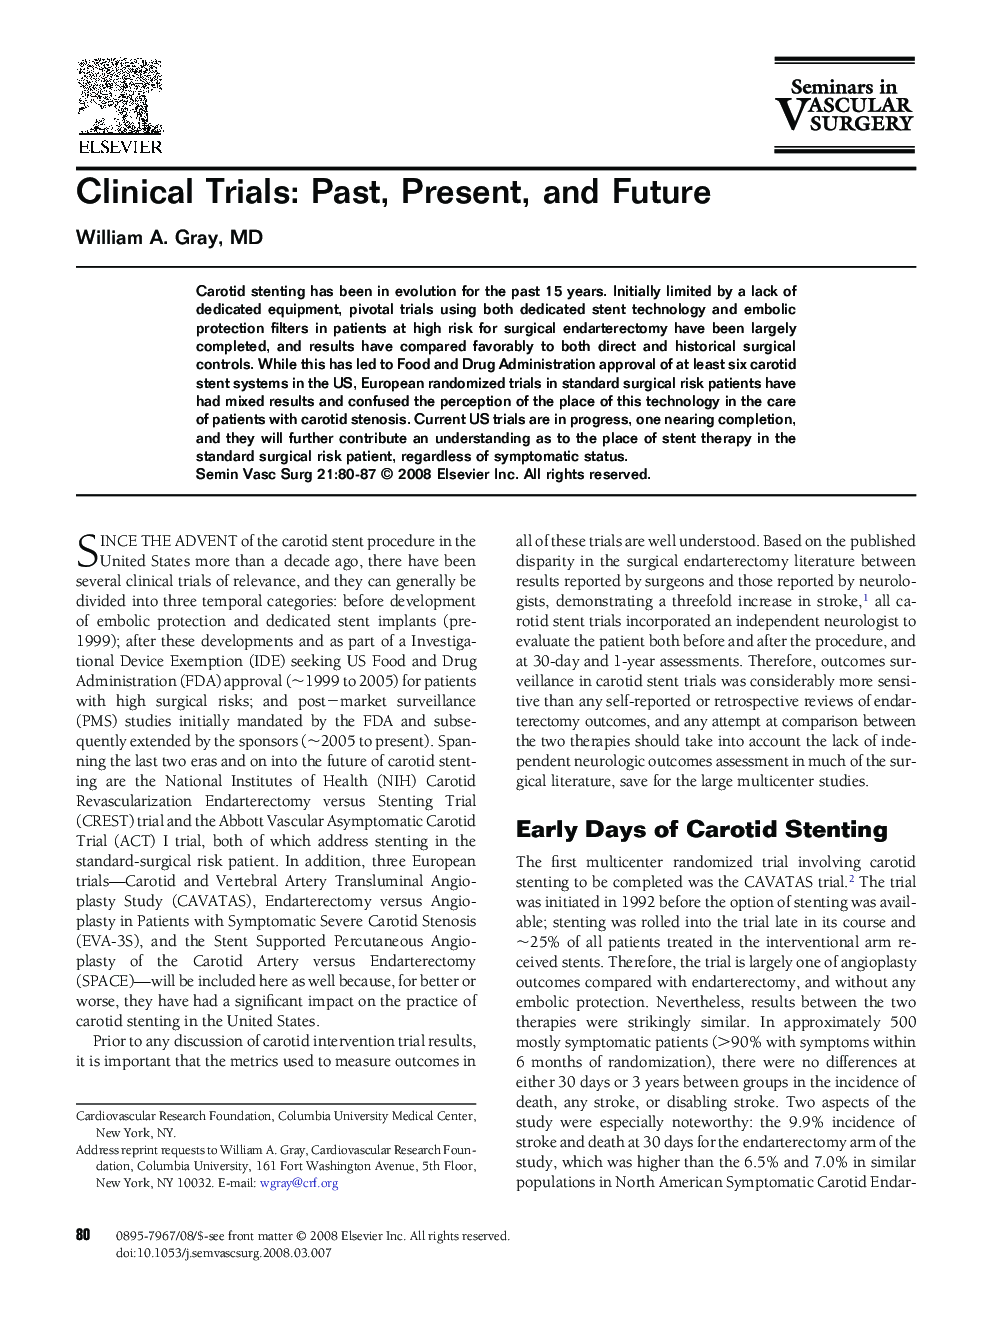 Clinical Trials: Past, Present, and Future